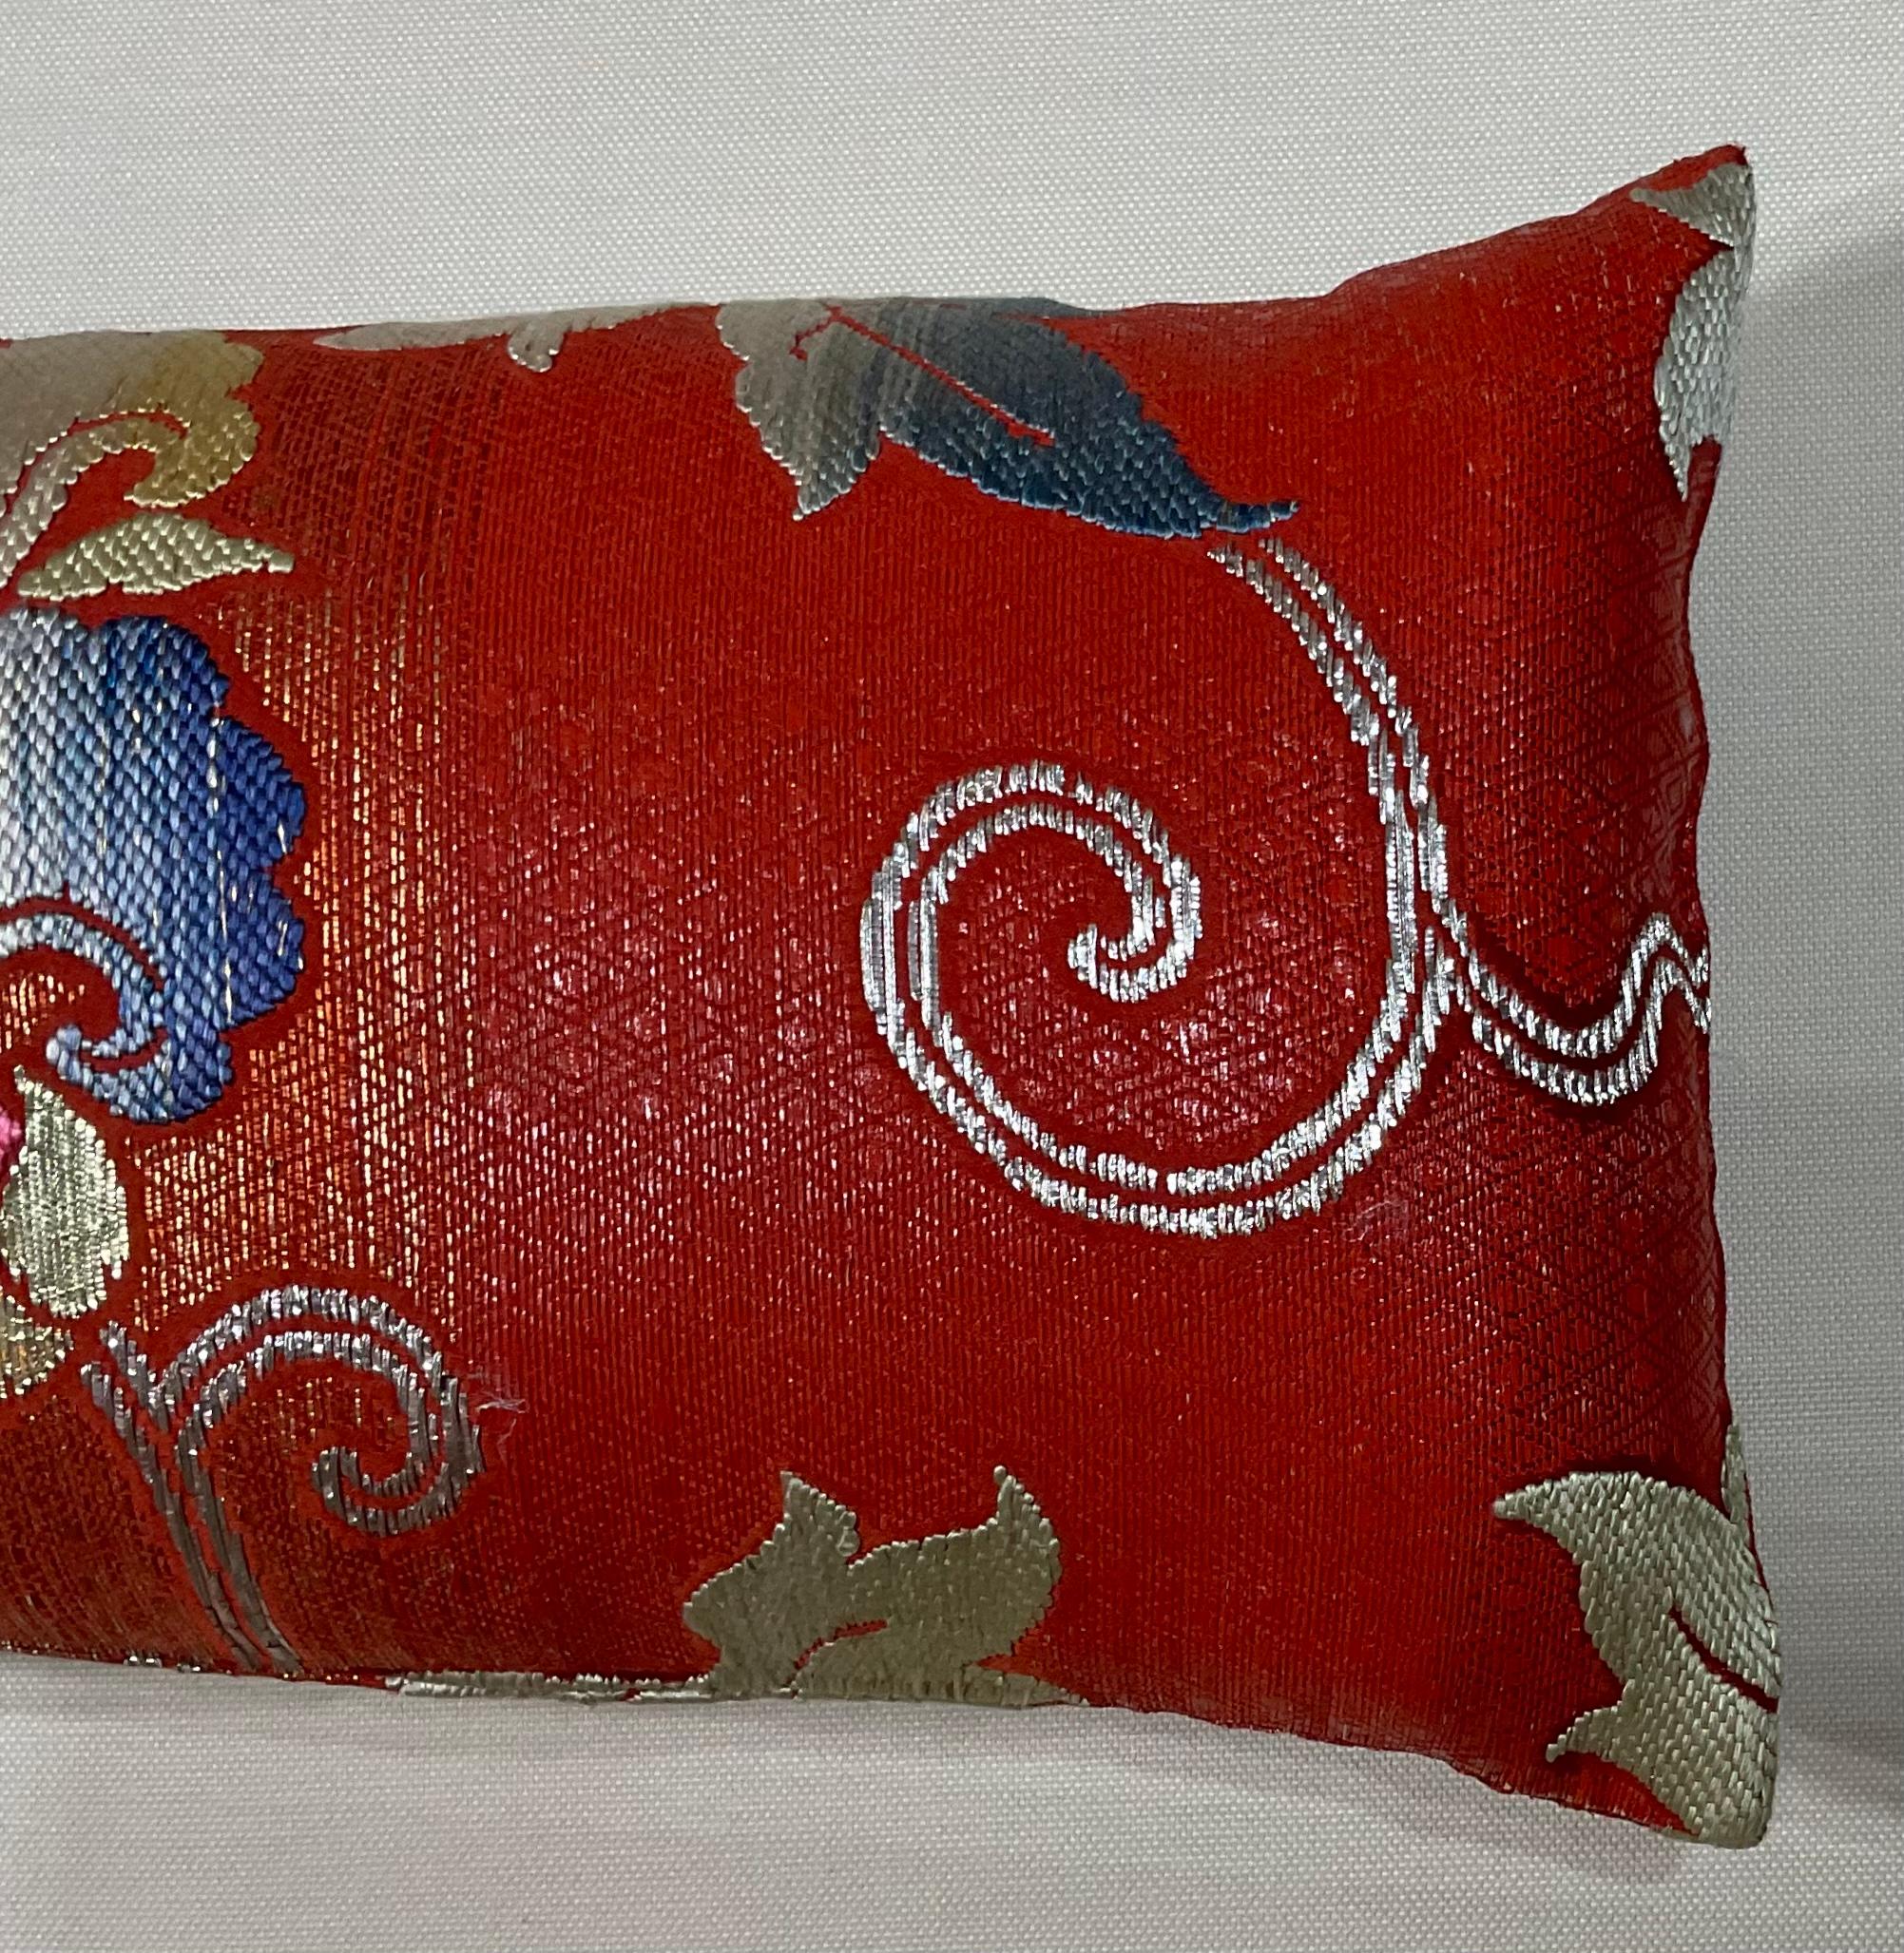 Beautiful pillow made of silk gold and silver metallic threads, exceptional double side floral motif.
New quality insert.